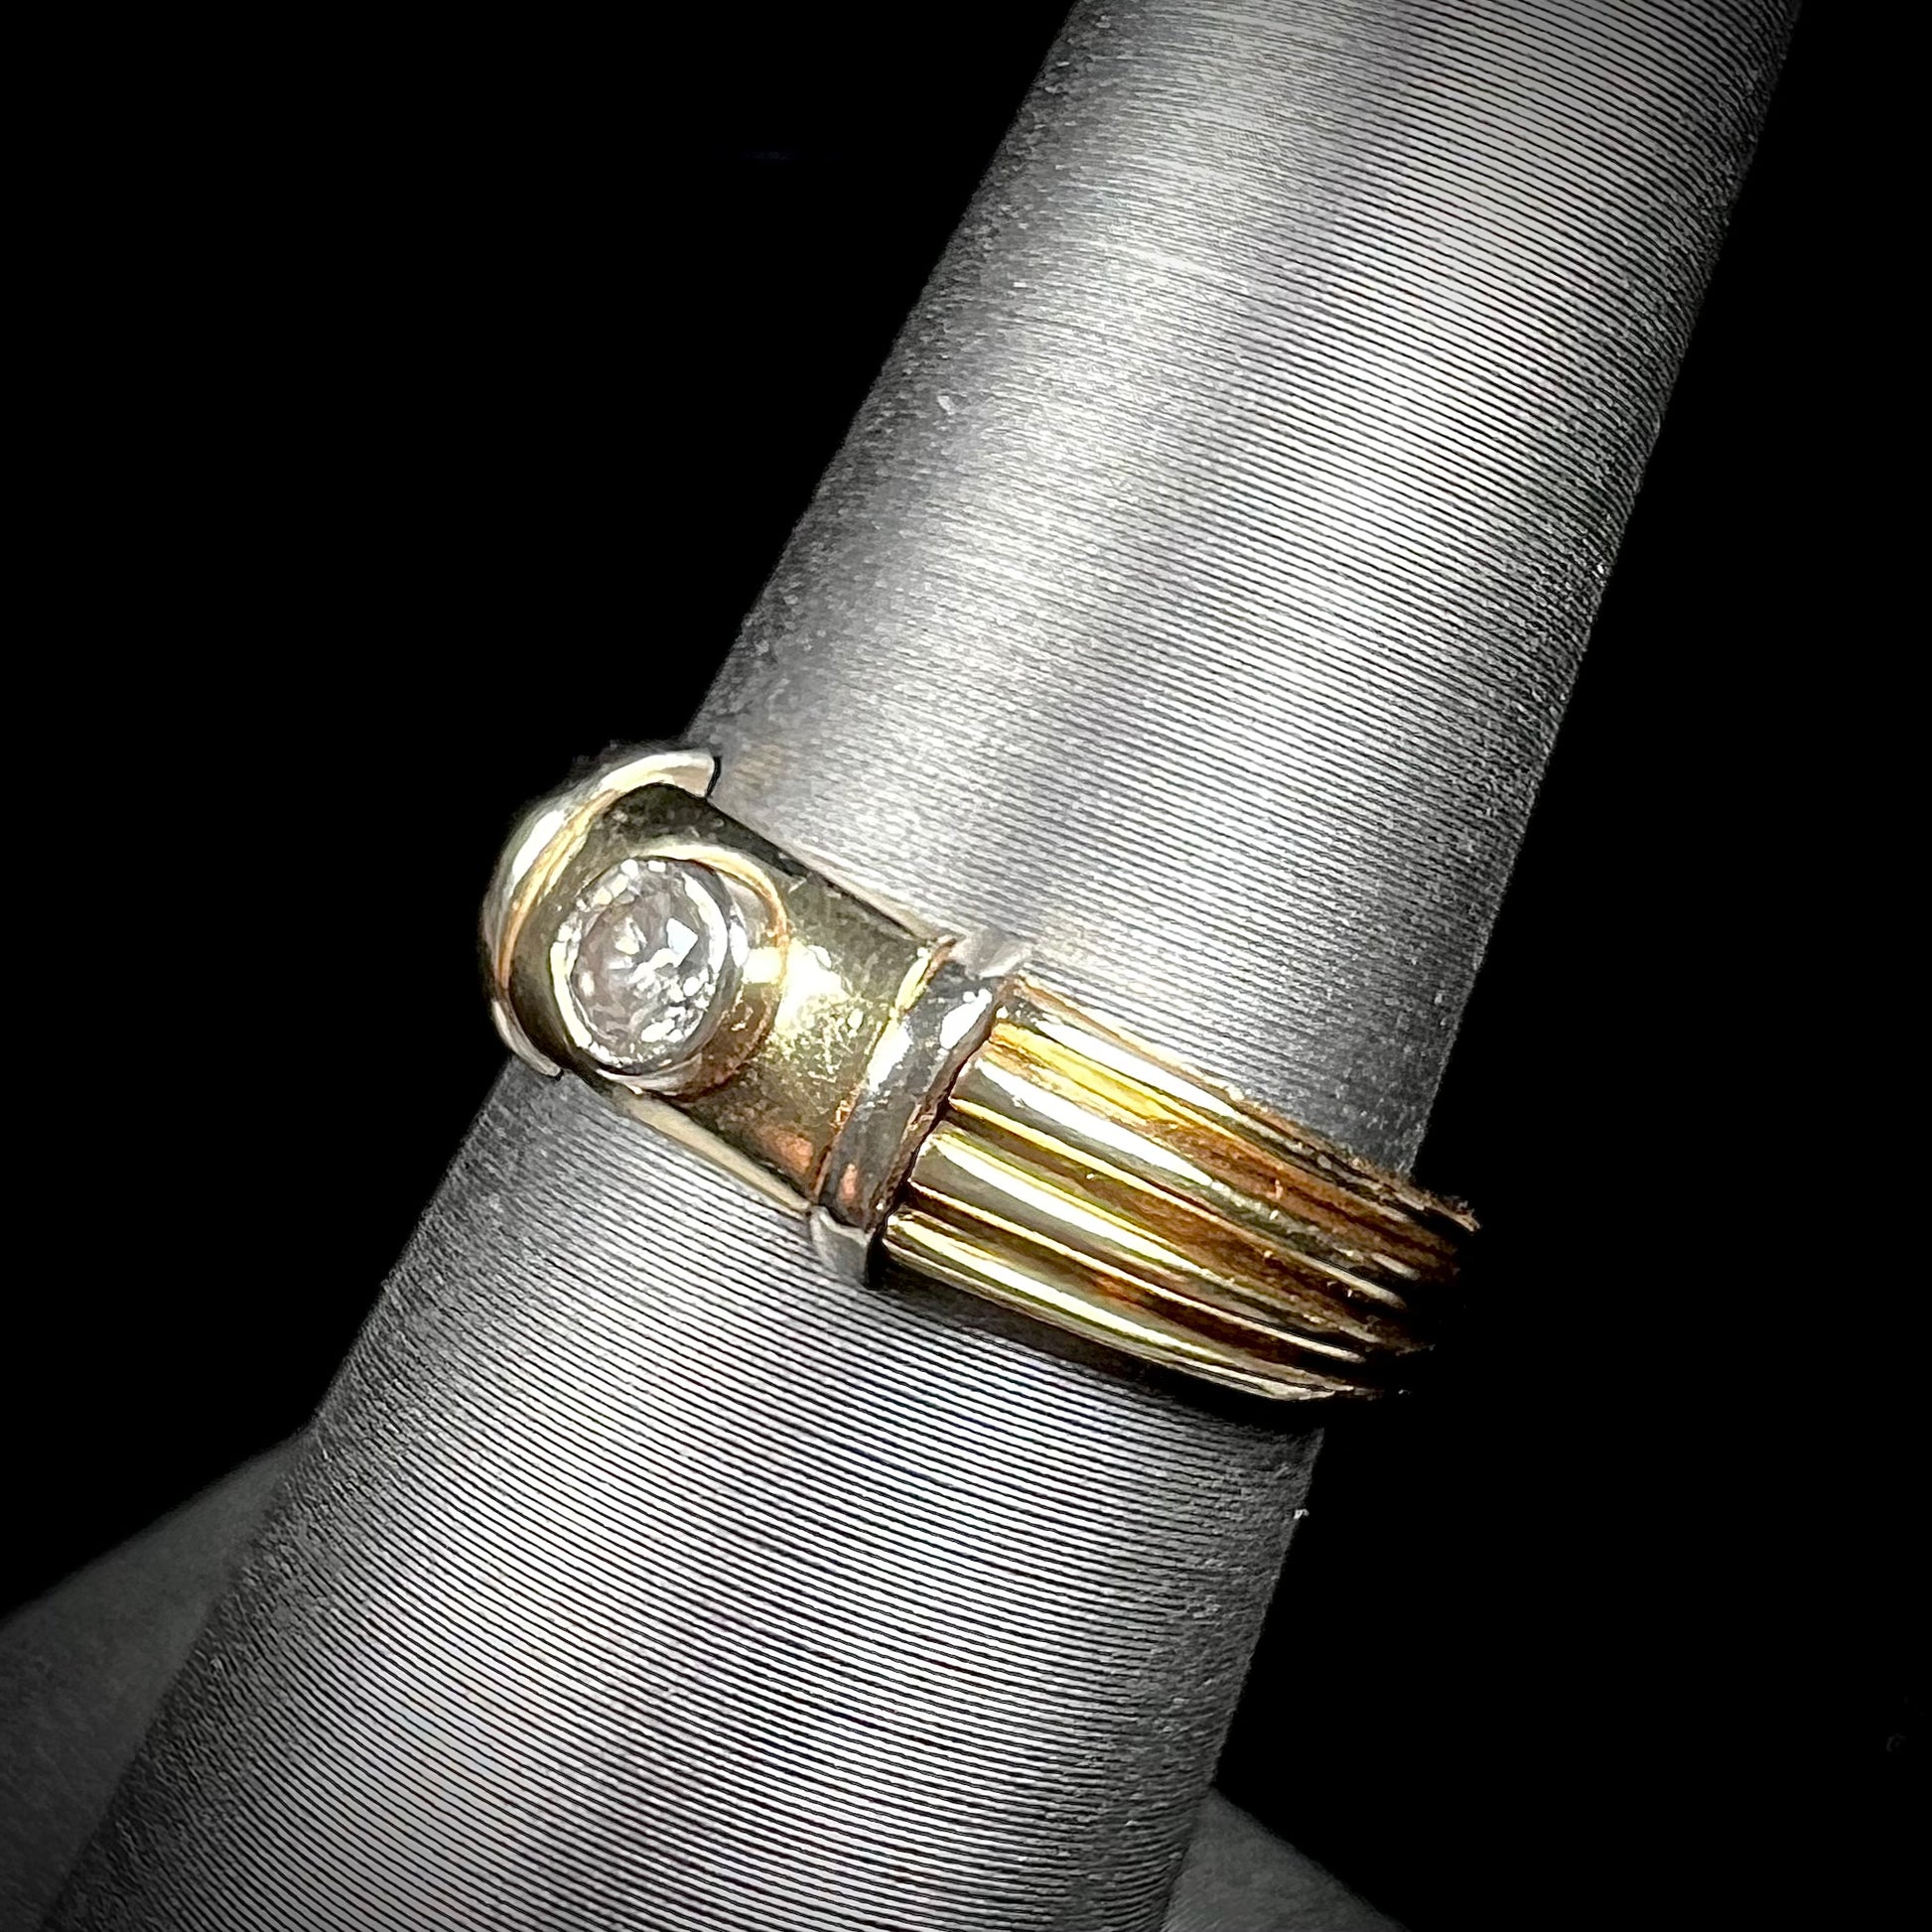 A unisex, vintage style two tone yellow and white gold wedding ring bezel set with a round diamond.